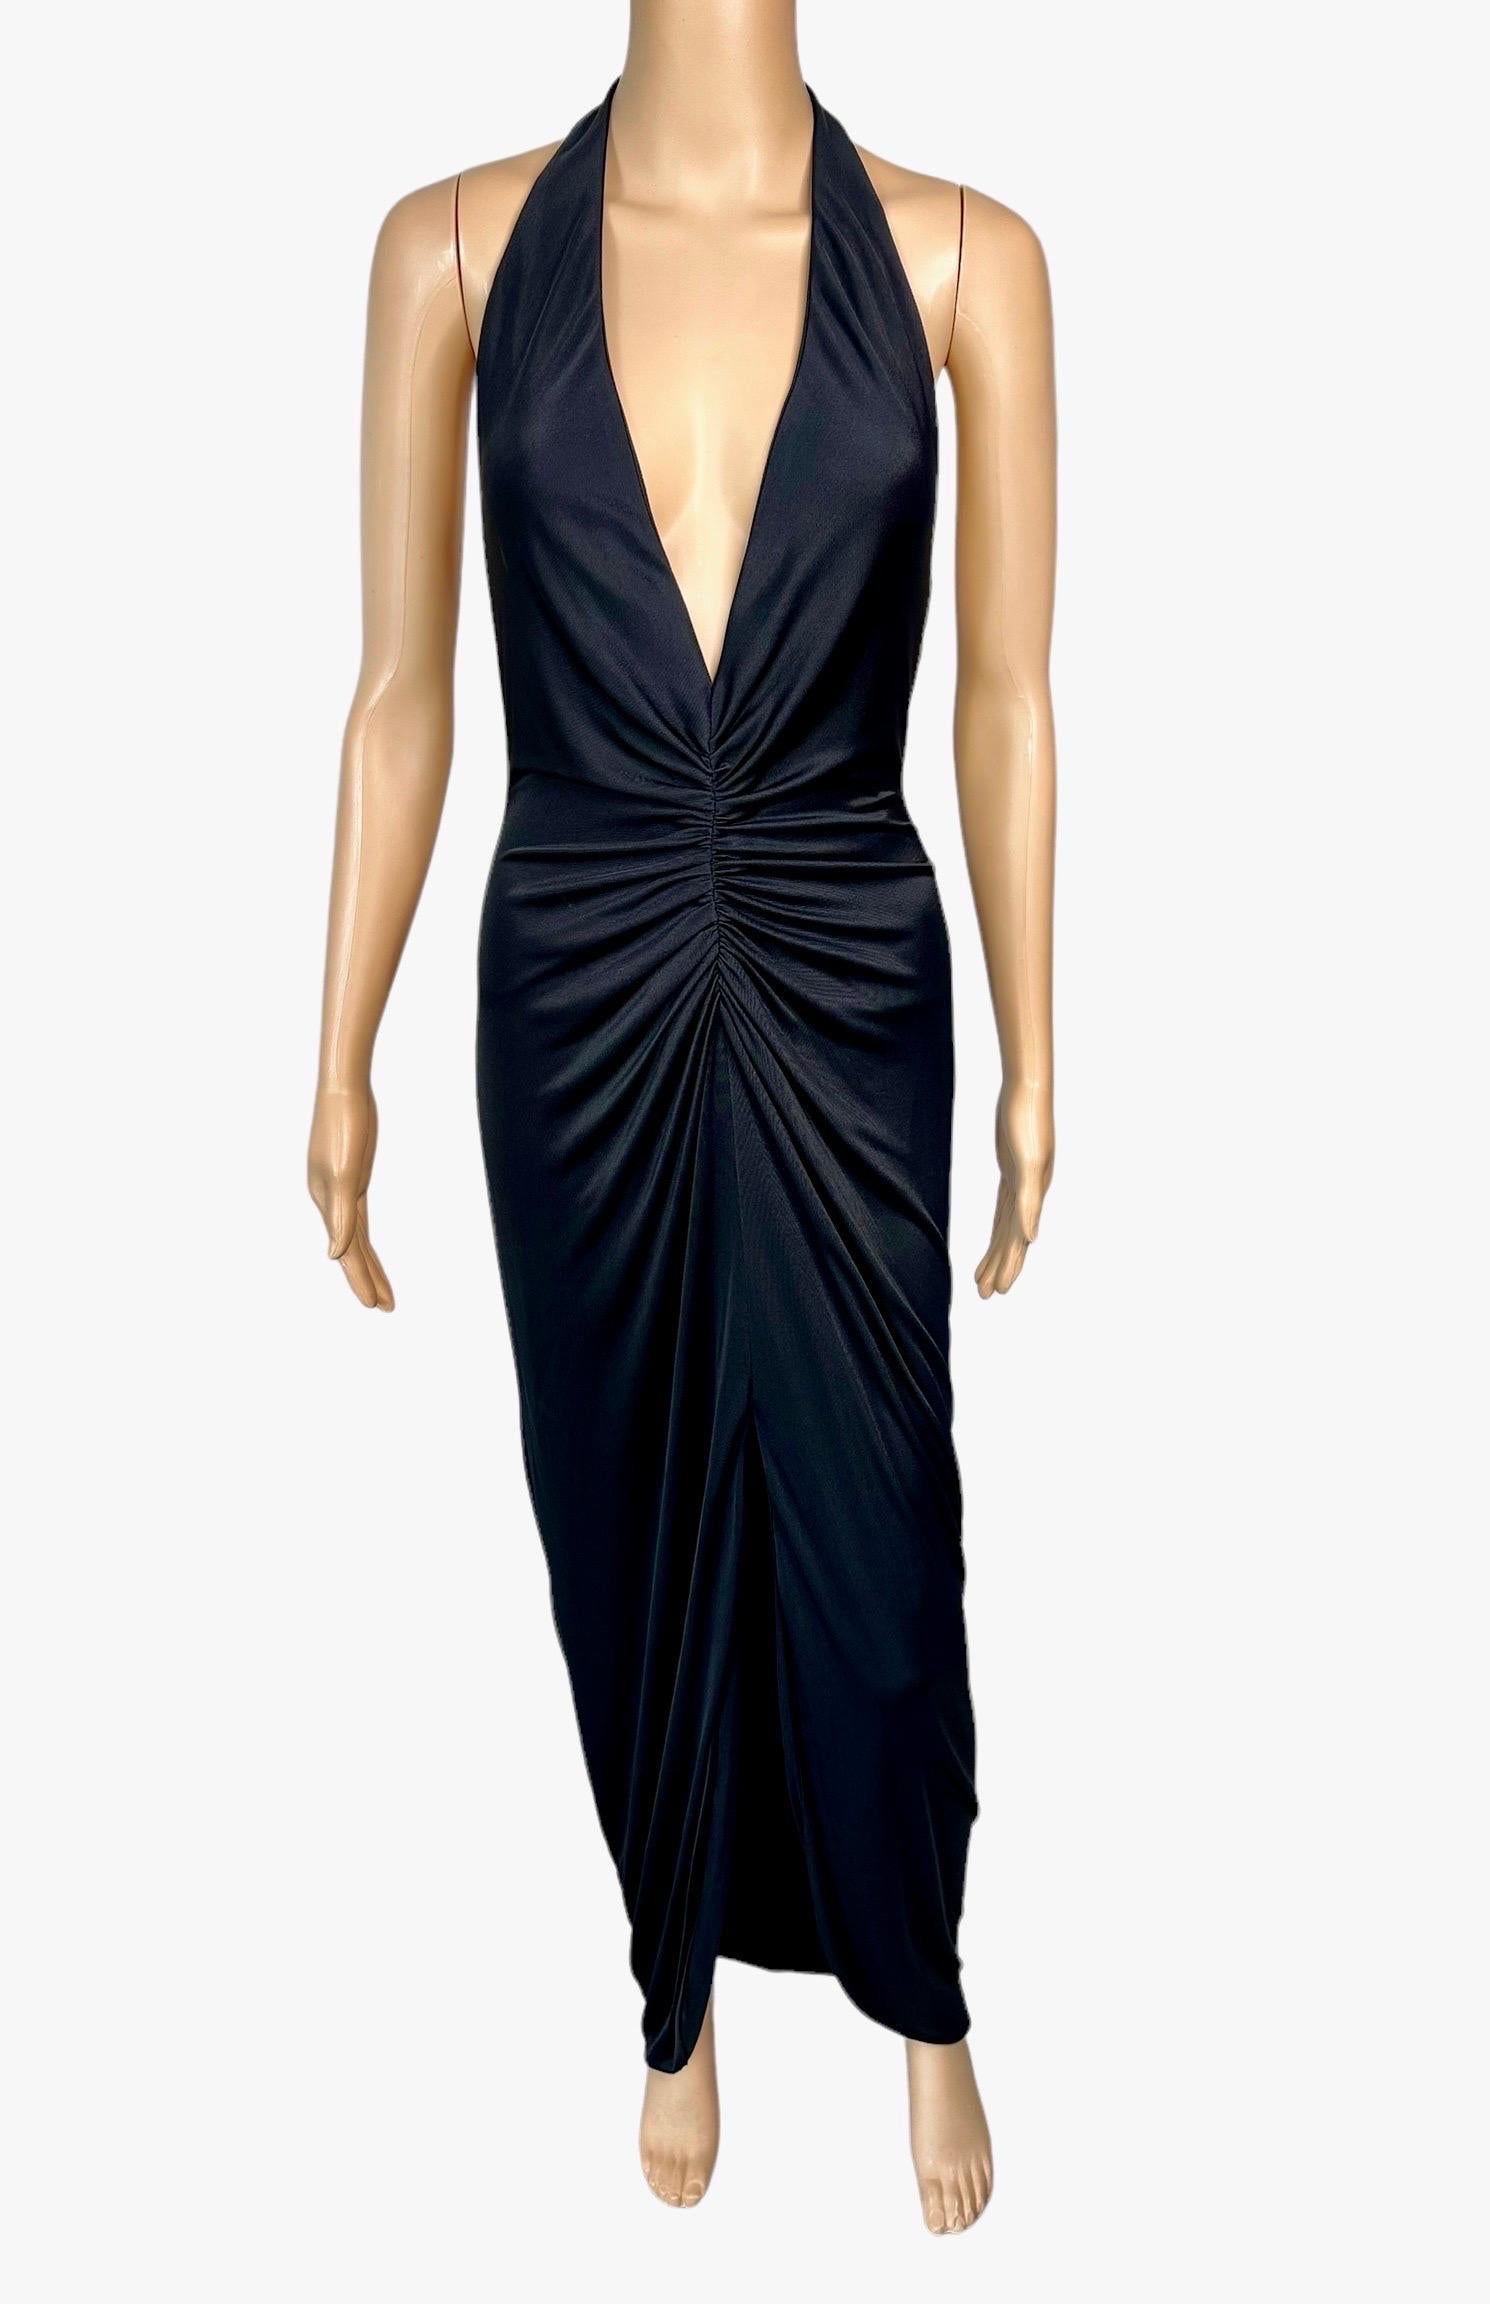 Versace S/S 2005 Runway Plunging Hi-Low Ruched Open Back Evening Dress Gown In Good Condition In Naples, FL